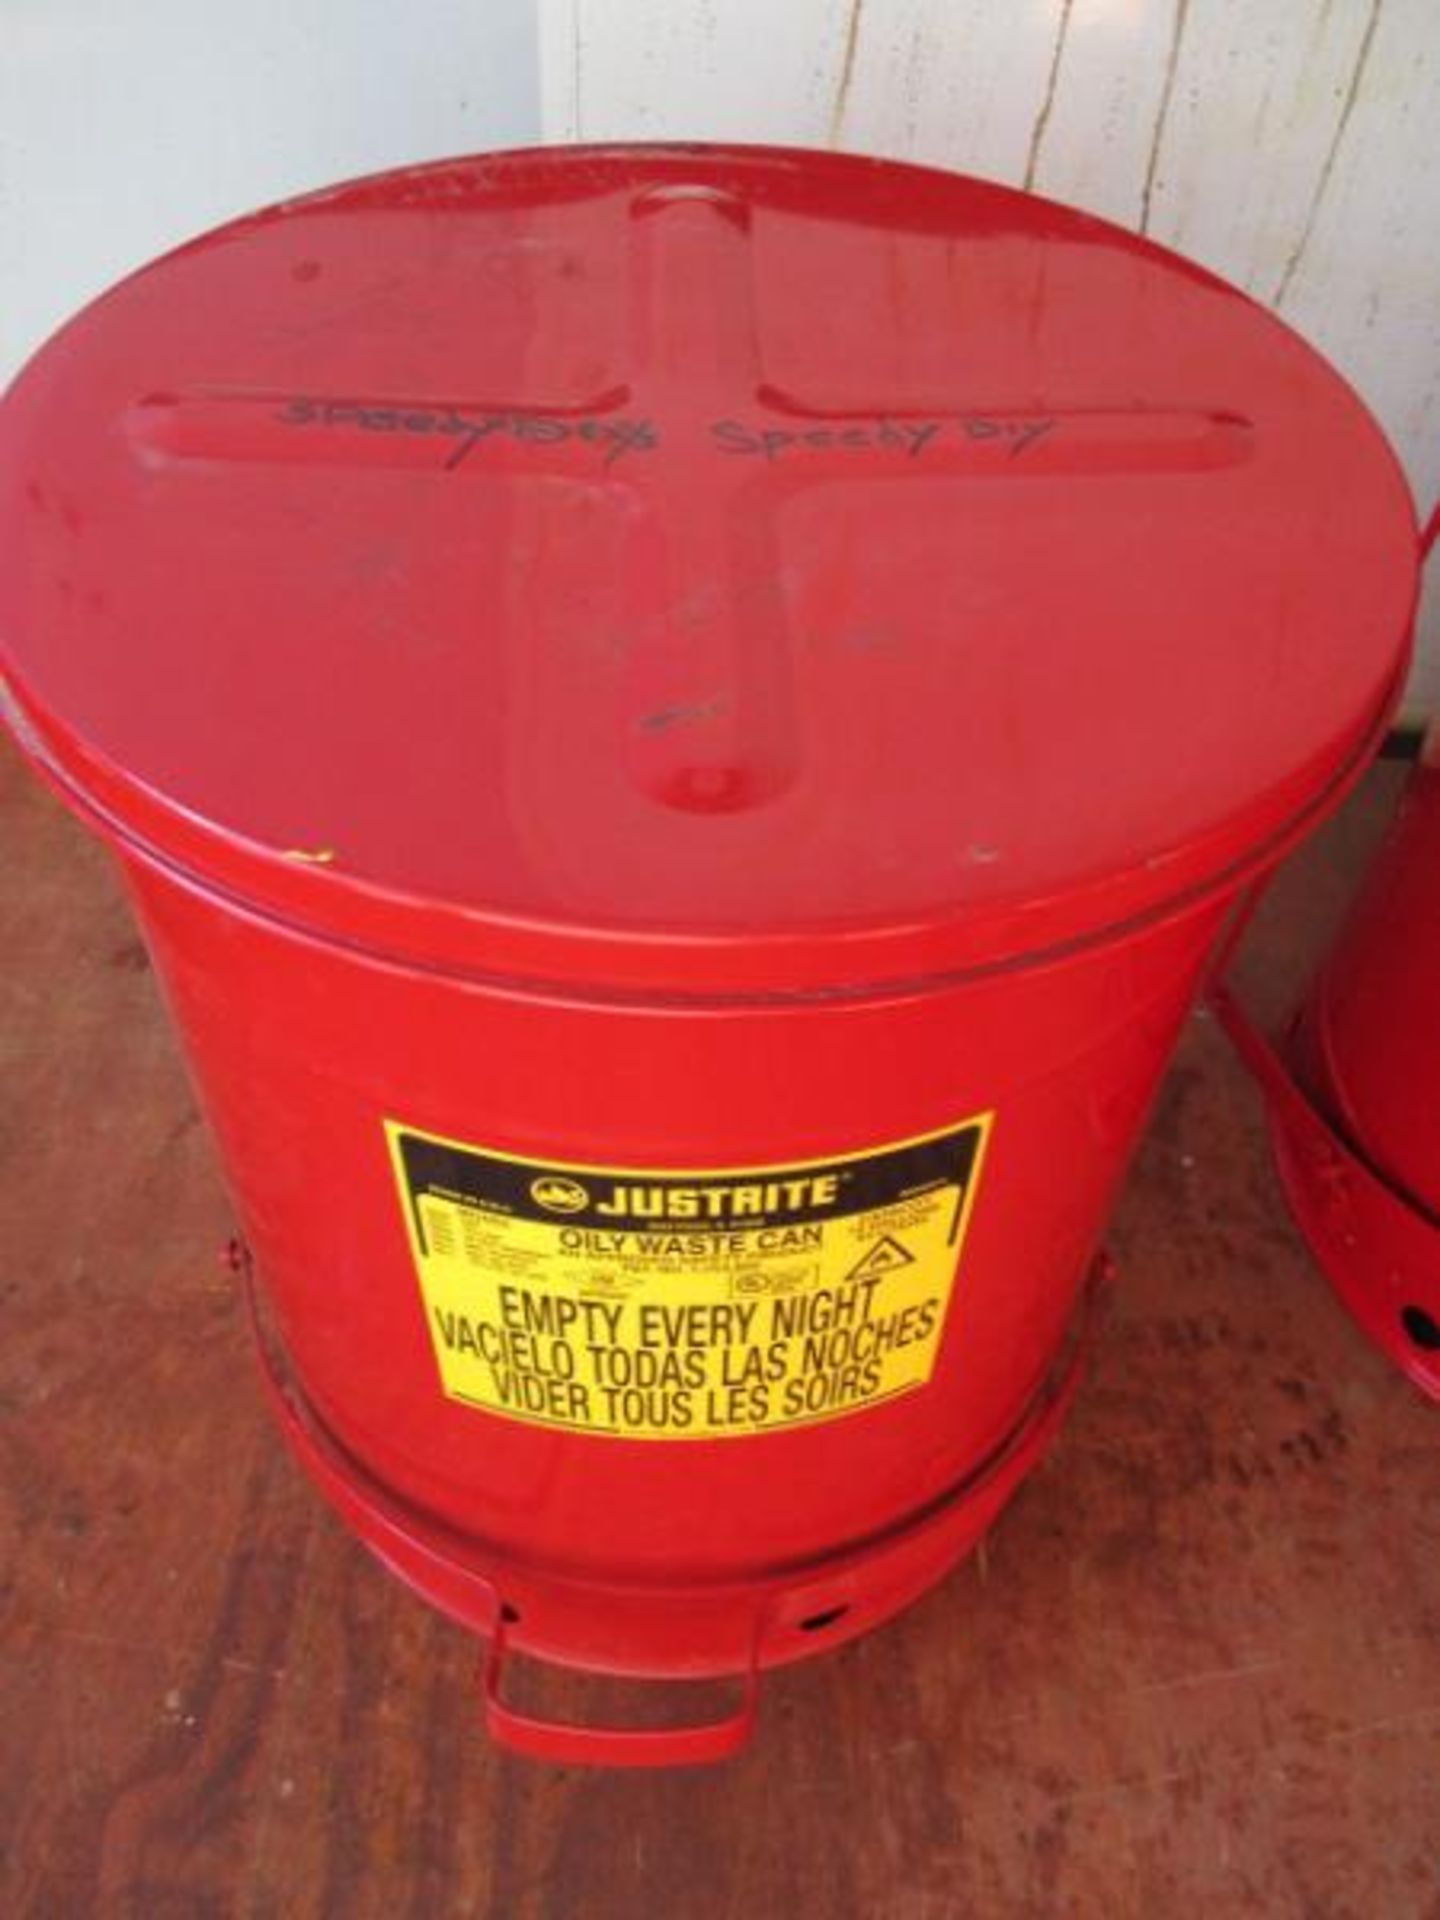 Justrite Oil Waste Can, Model: 09500, 14 Gallon, Metal, Red w/ Foot Pedal Lid Metal, Red w/ Foot